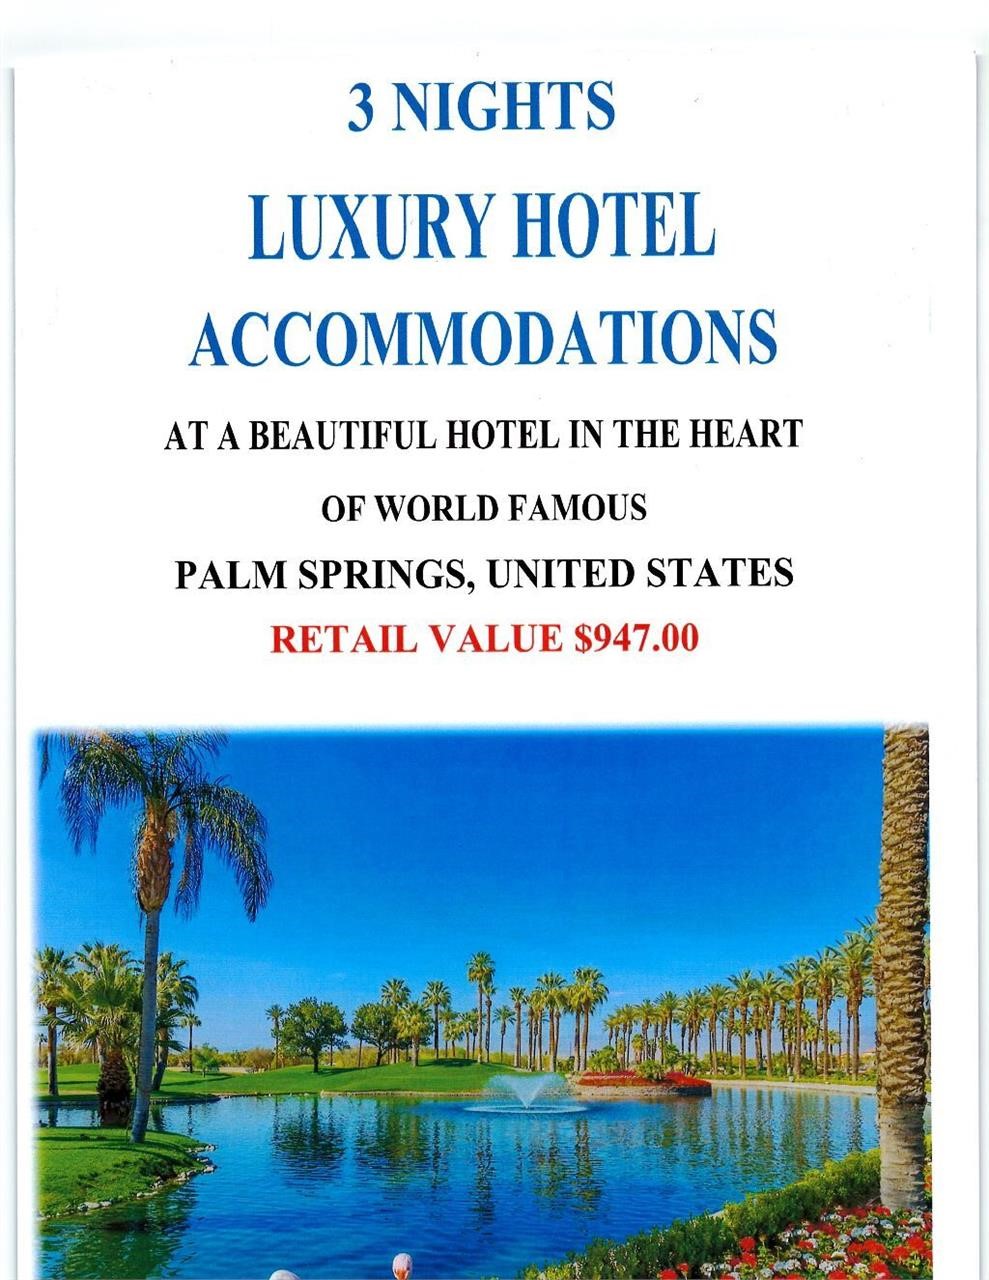 April 14TH. Vacation Hotel Accommodation Packages Auction